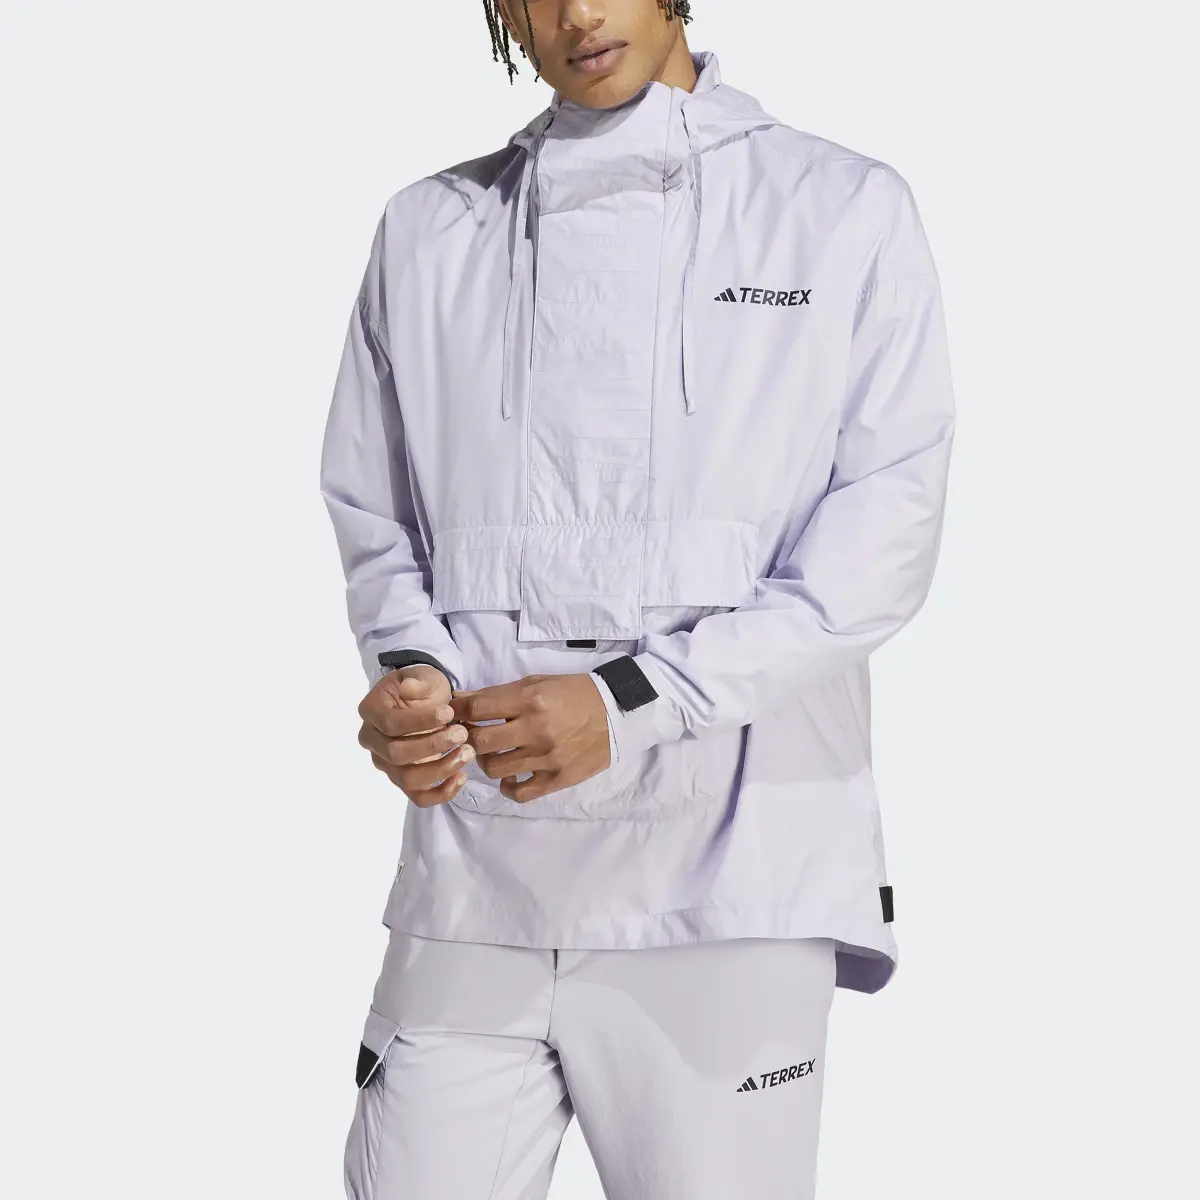 Adidas TERREX Made to Be Remade Wind Anorak. 1